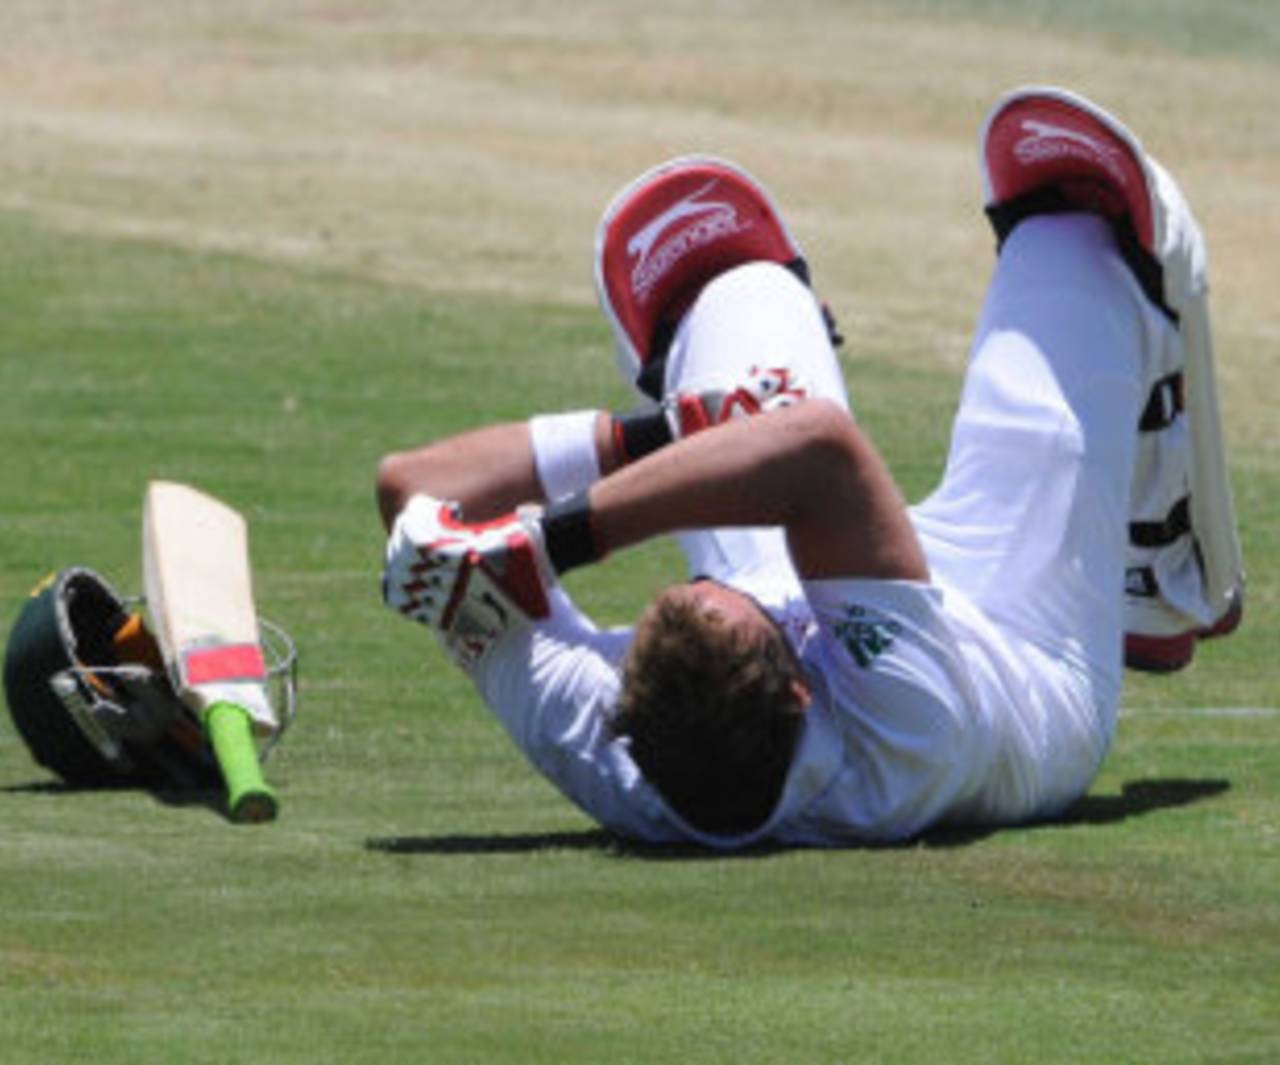 Jacques Kallis falls to the floor after being hit by a short ball that did not rise, South Africa v Sri Lanka, 1st Test, Centurion, 2nd day, December 16, 2011